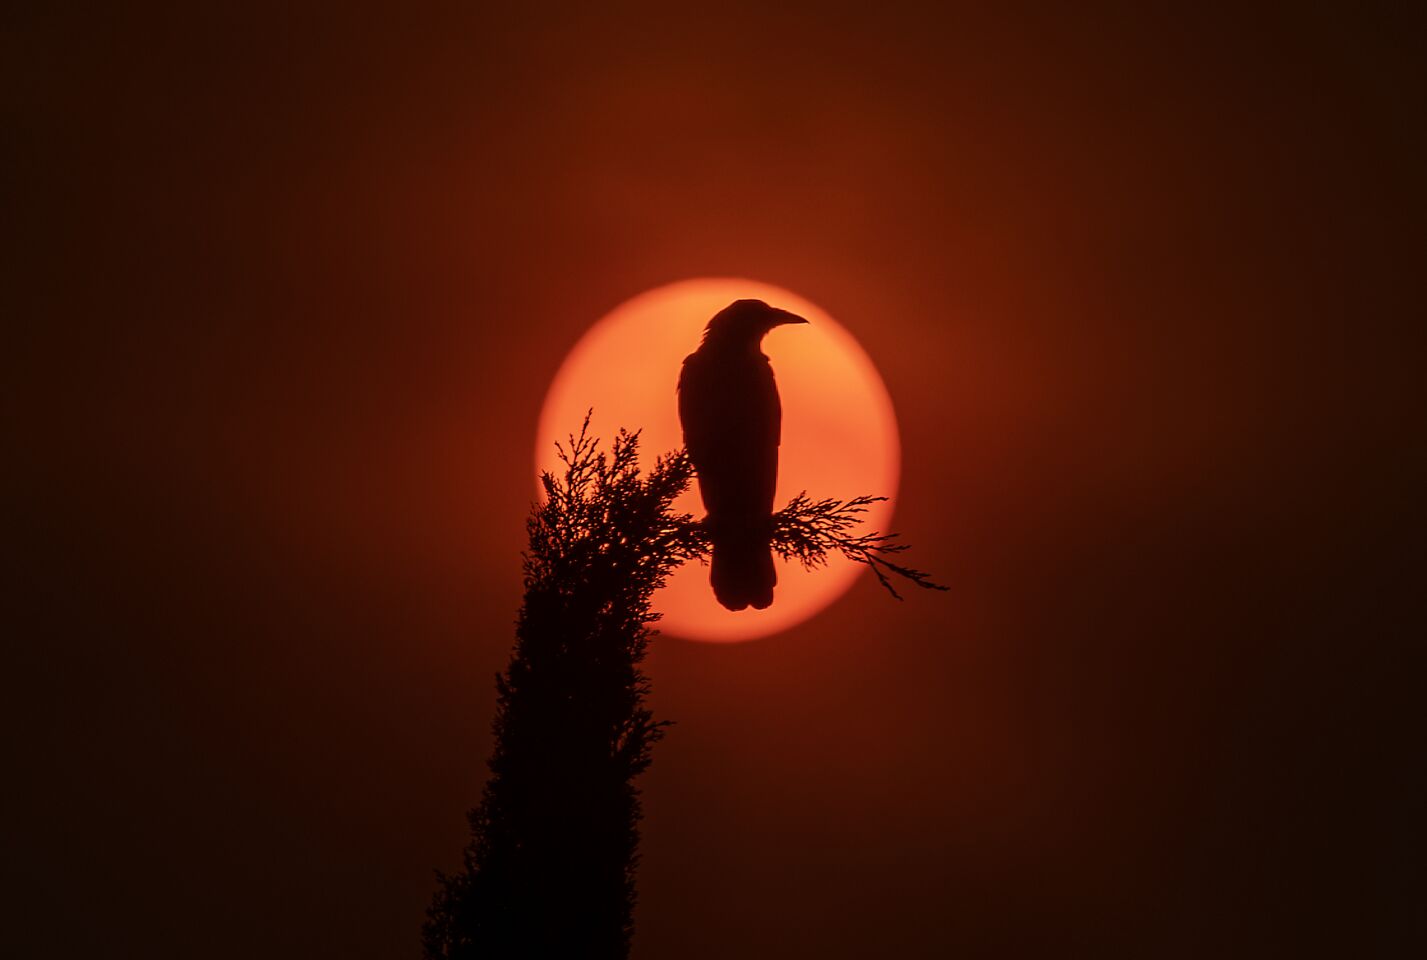 A crow on a cypress tree is silhouetted by a hazy sun.